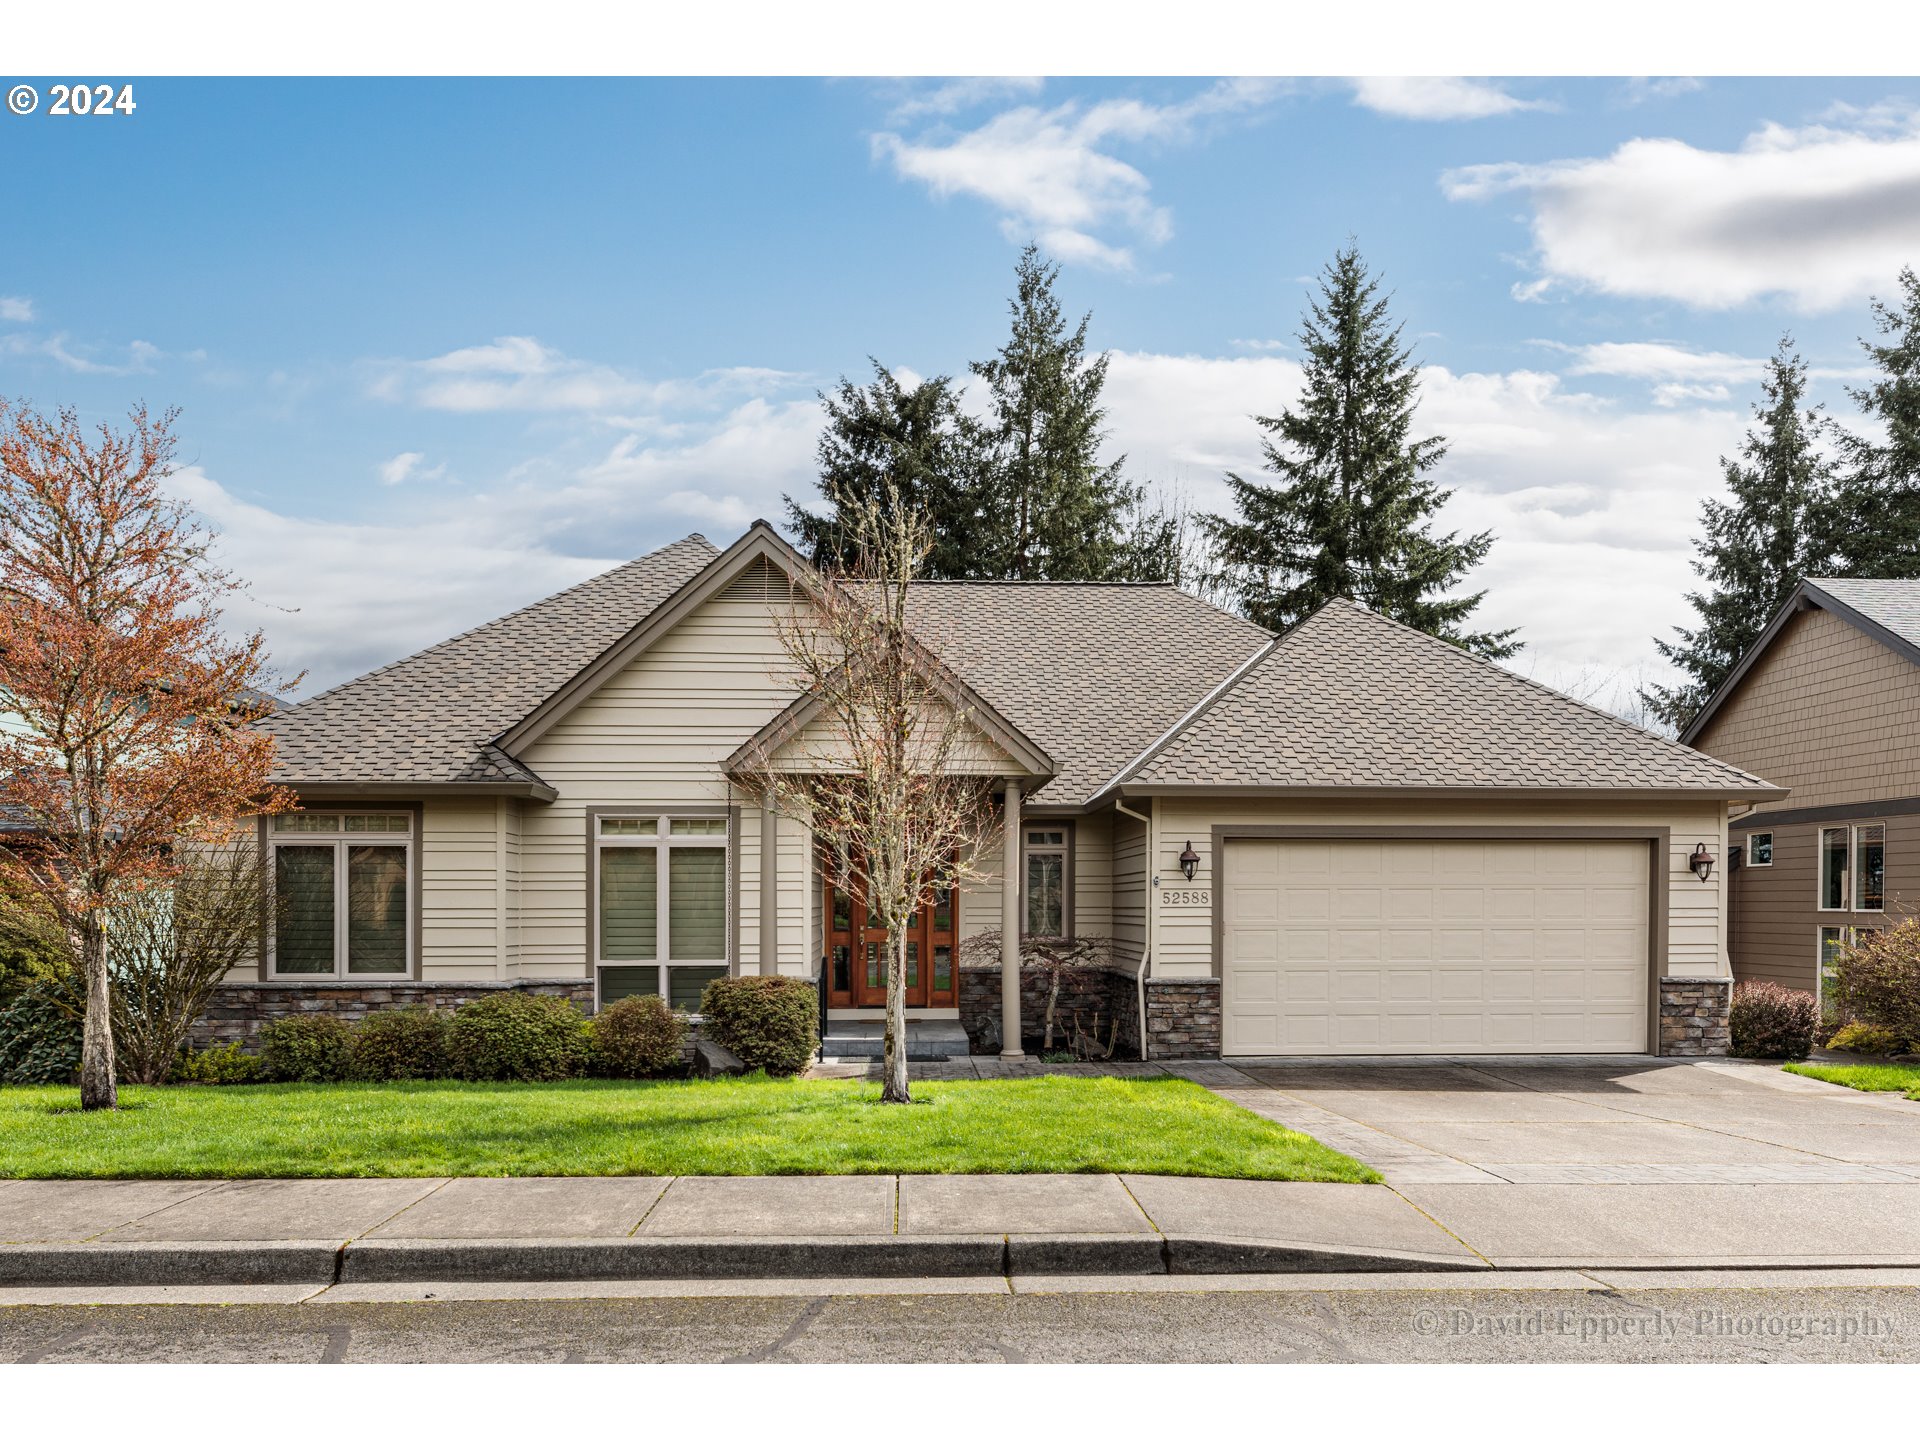 52588 NW MARIA LN, Scappoose, OR 